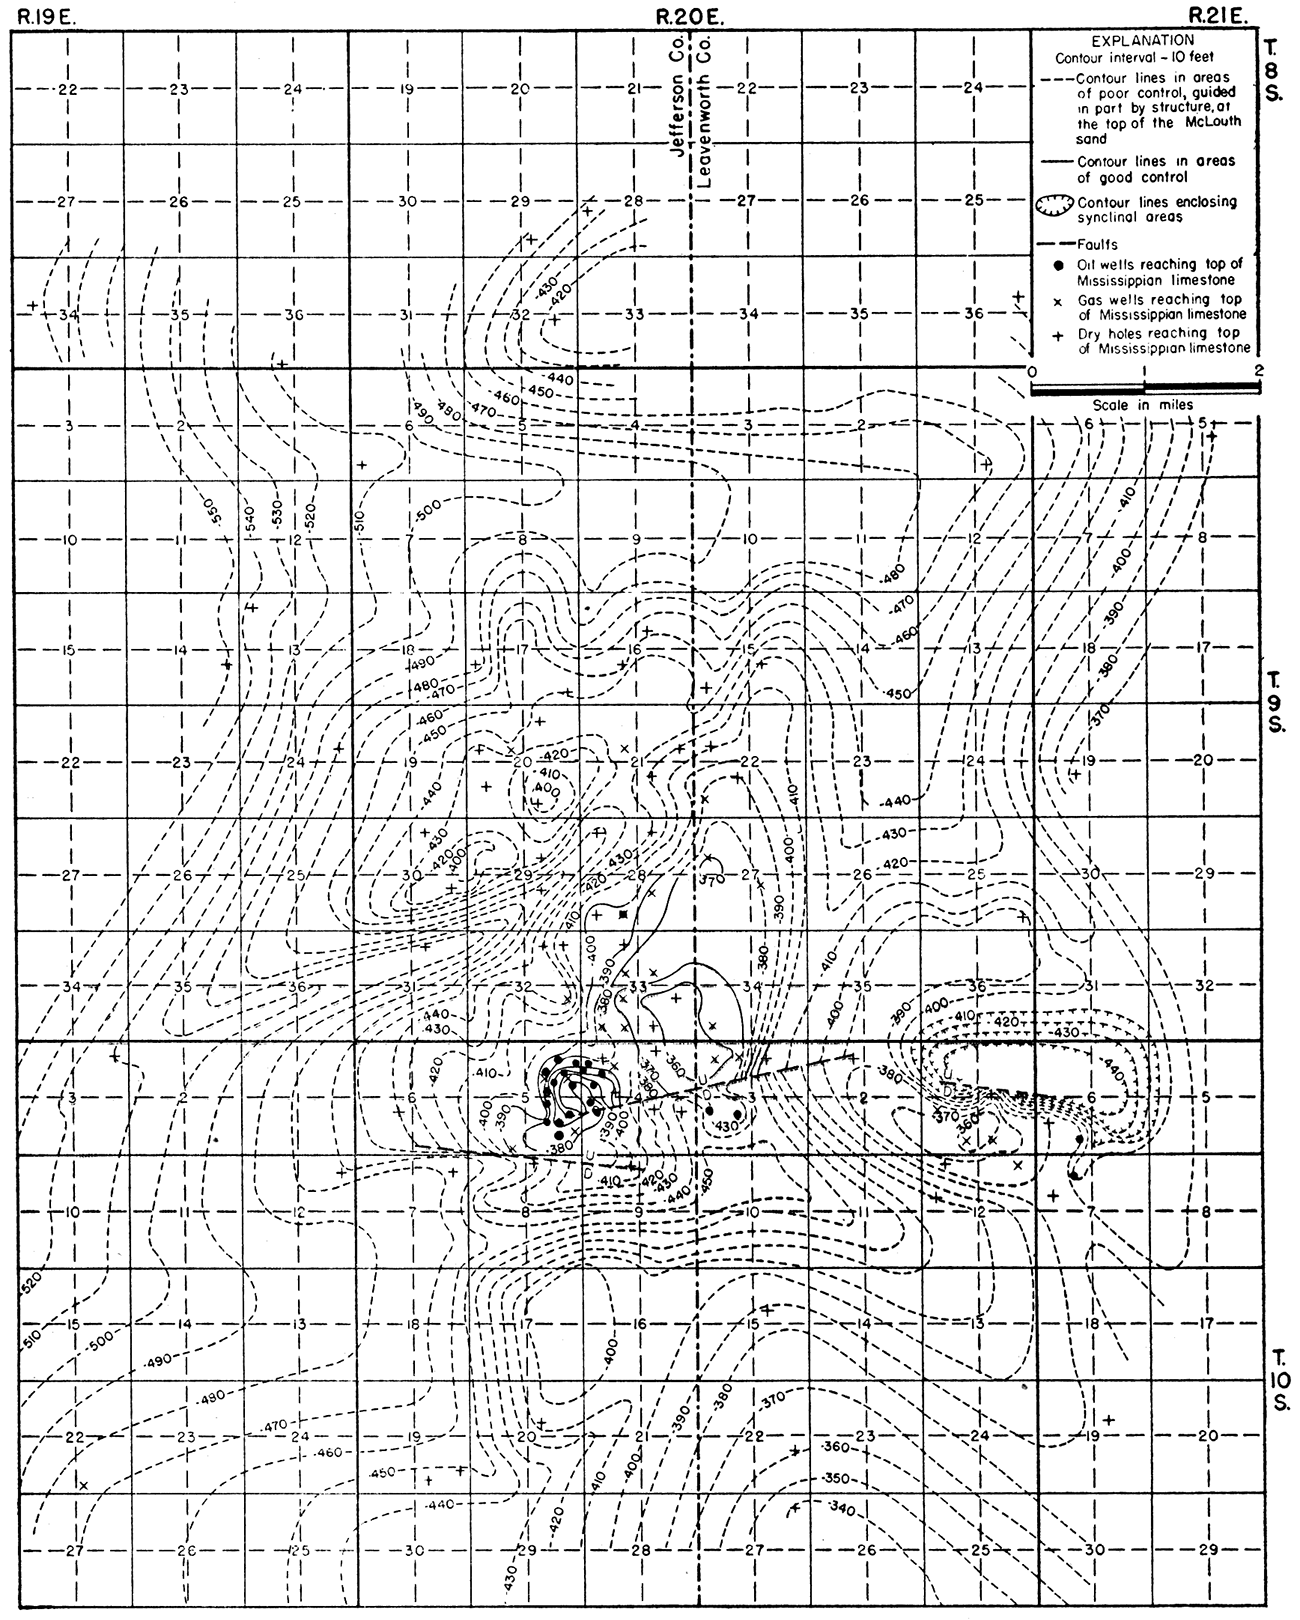 Map showing the structure of the McLouth field contoured on the top of the Mississippian limestone.